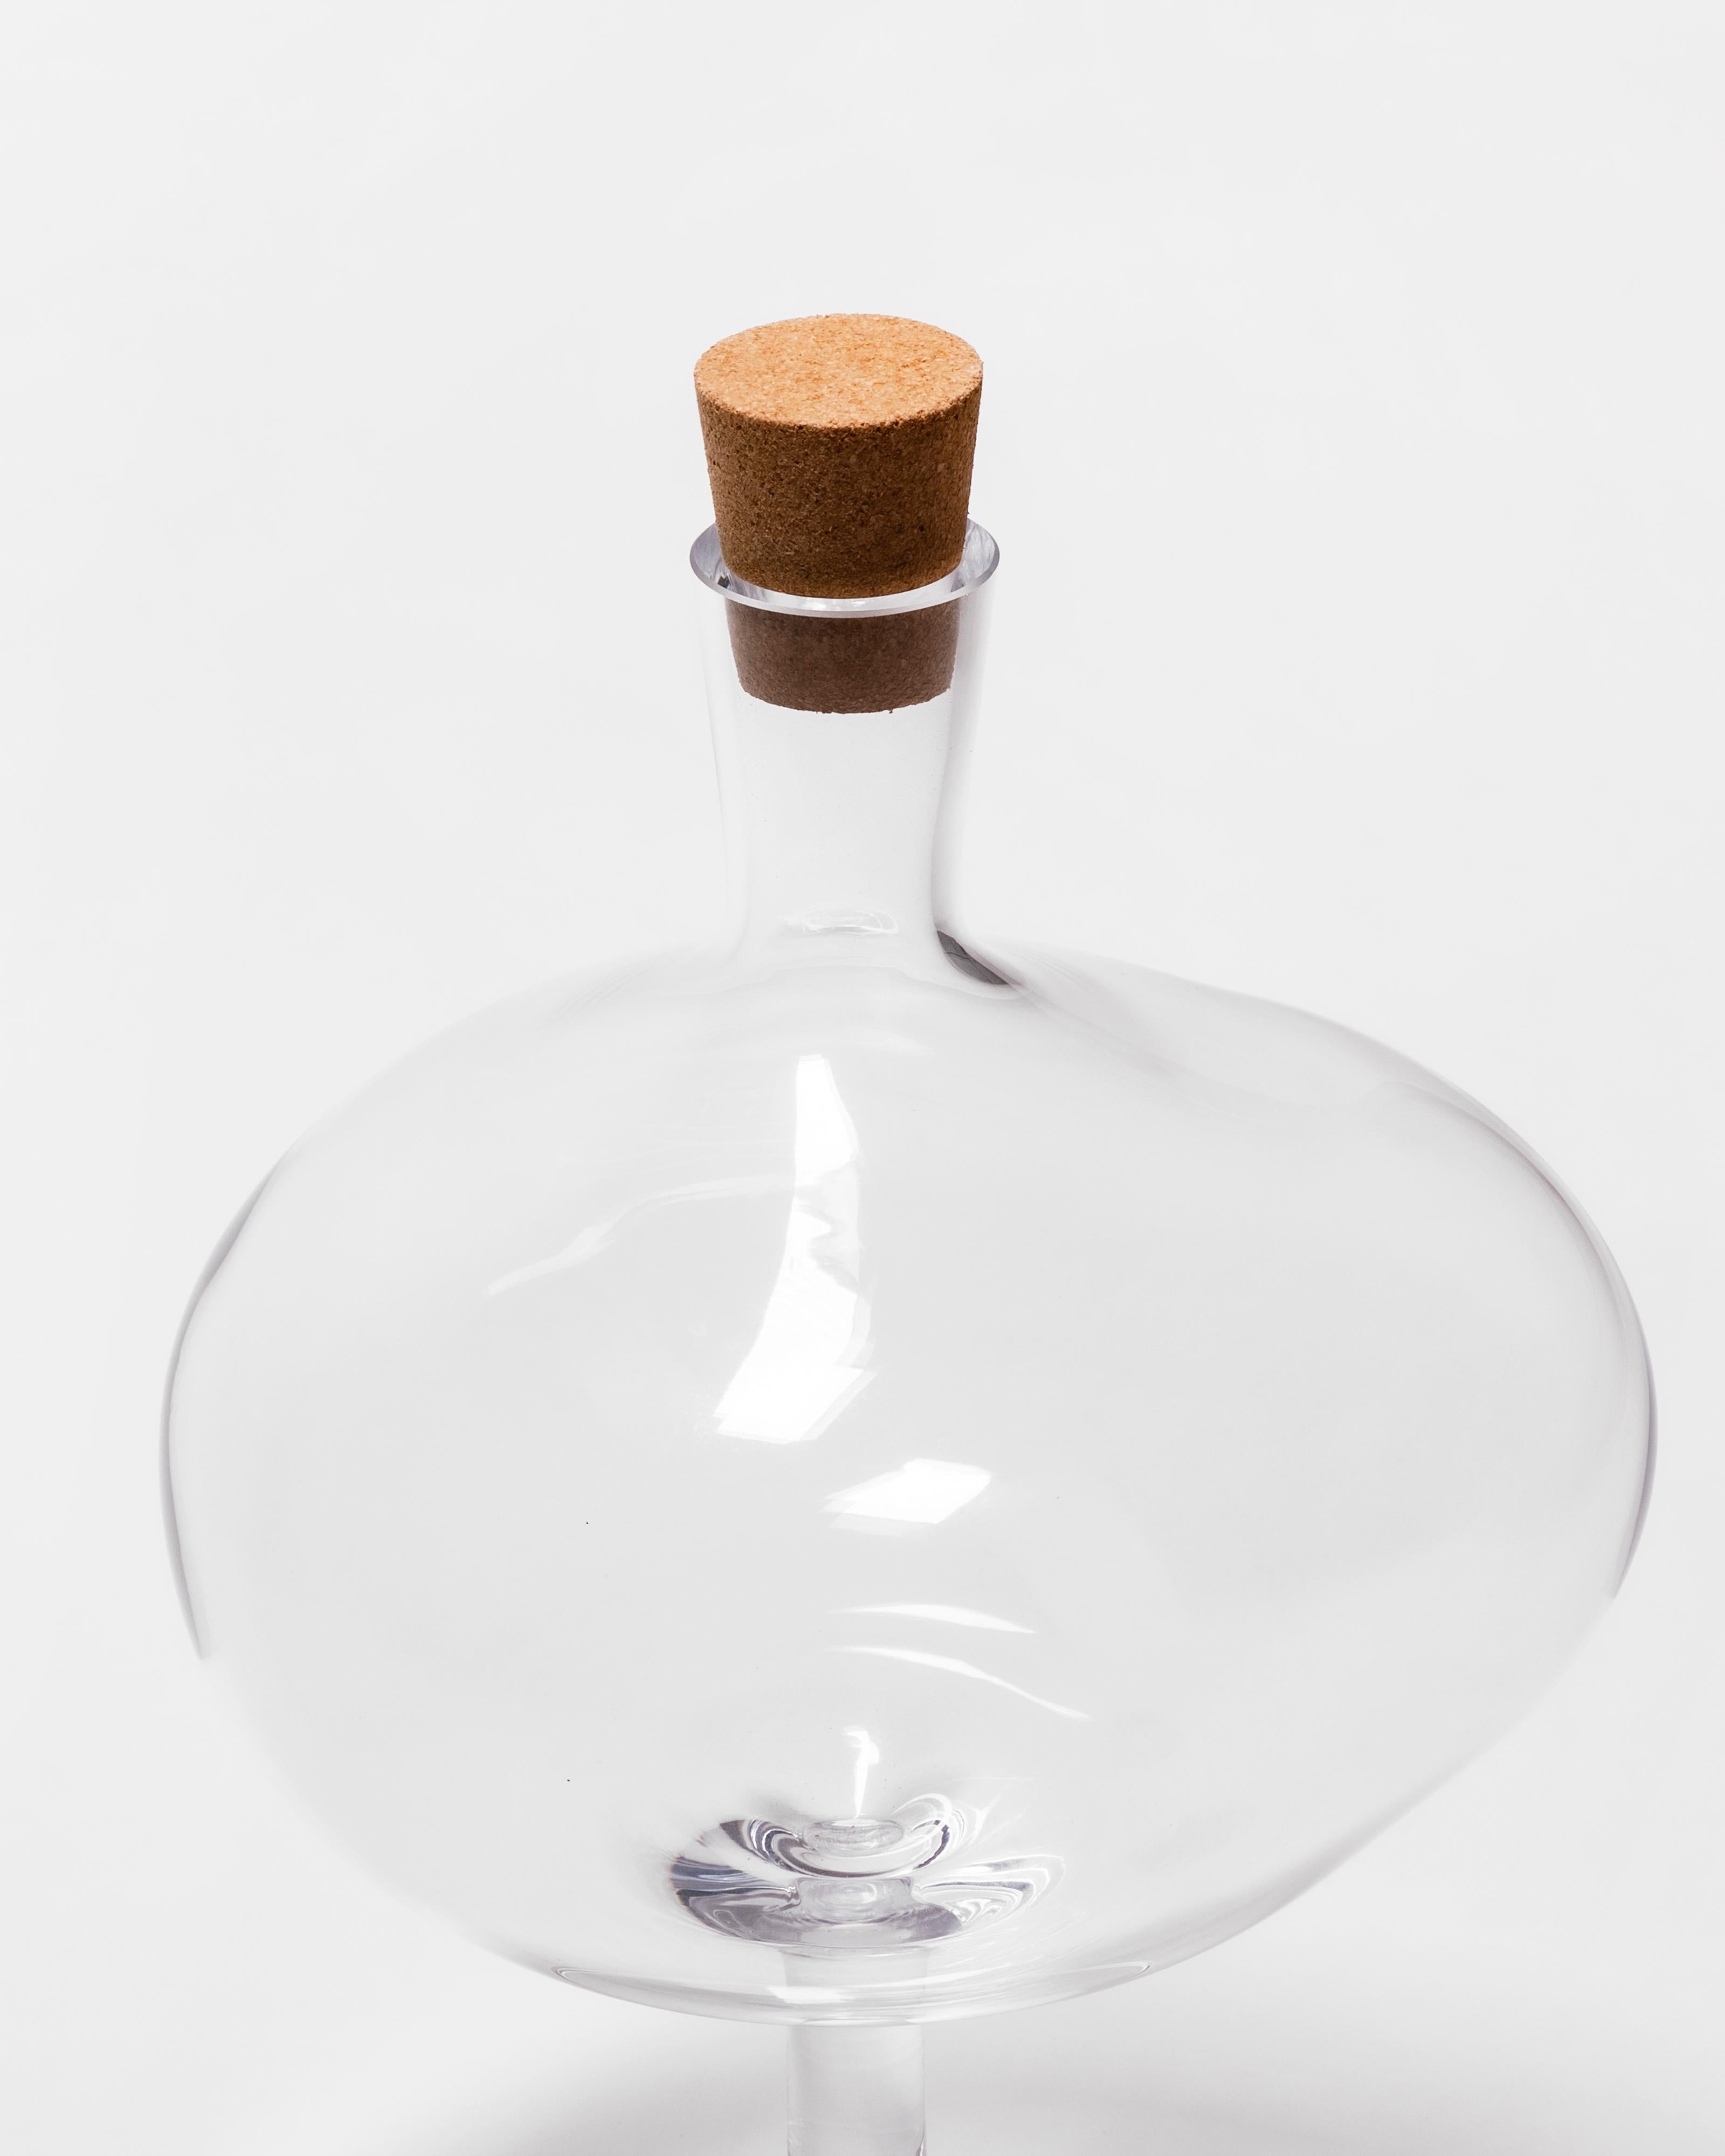 Like a tall wineglass, Bod balances confidently while its bowl captures the play of light. With their sheer and tall shape, the bottles are a piece of art that stands grounded in every home. The clear glass bottle on a foot can be used as a